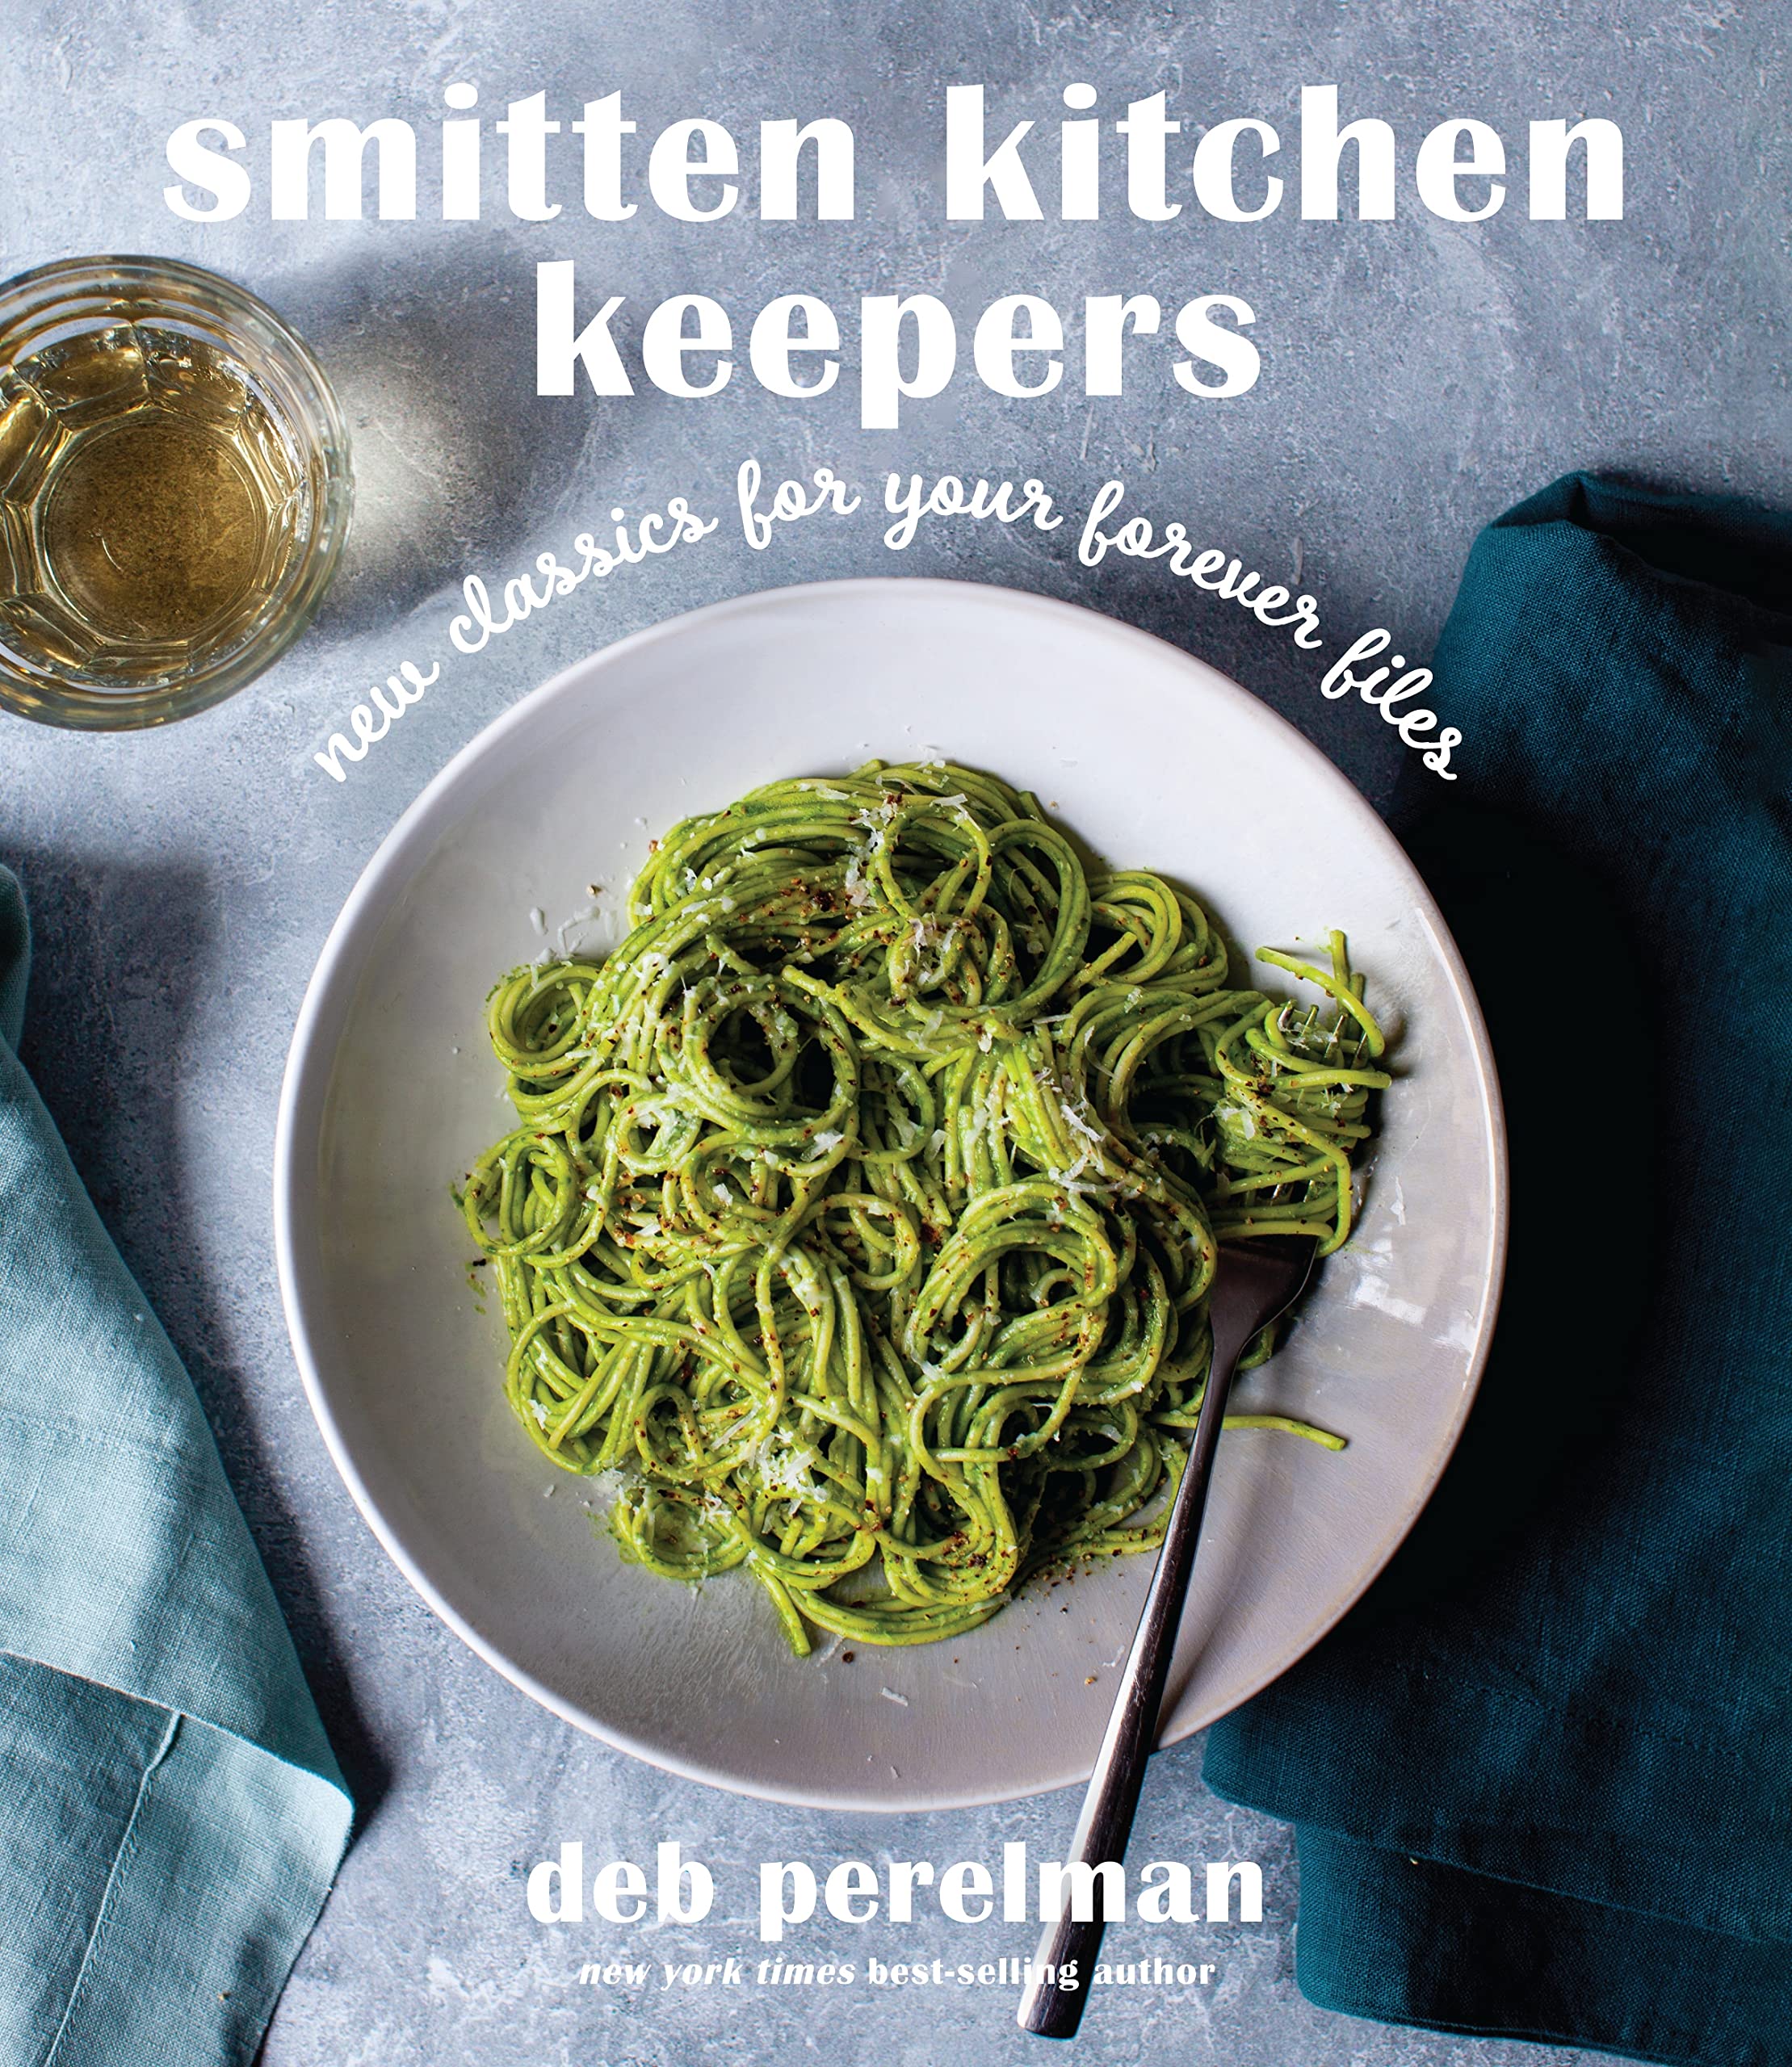 Smitten Kitchen Keepers: New Classics for Your Forever Files (Deb Perelman) *Signed*